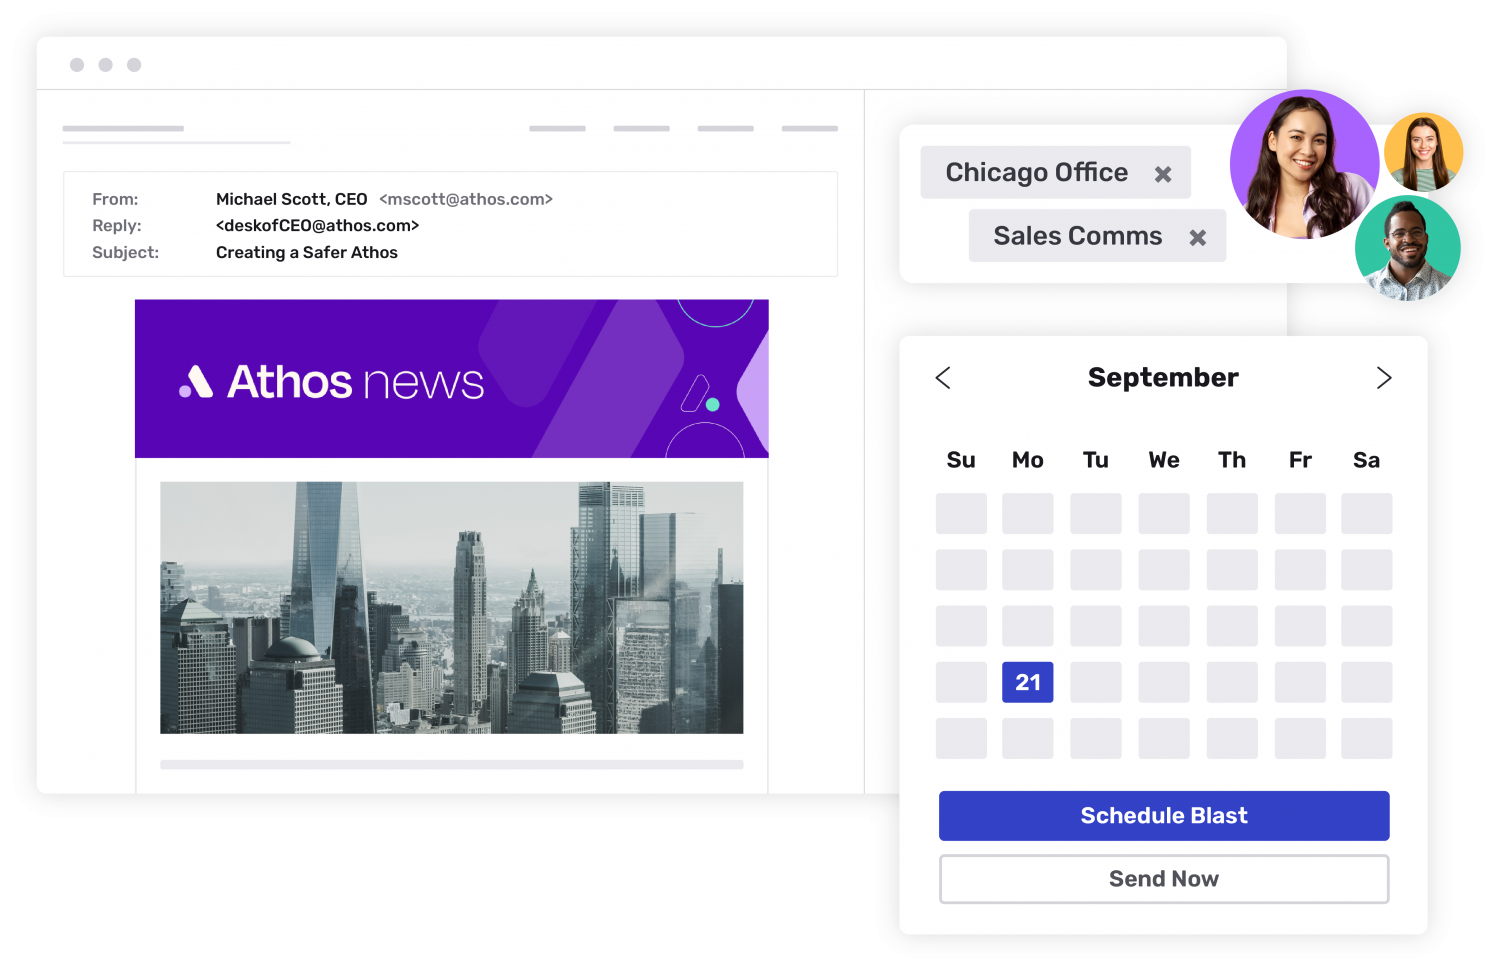 Athos corporate news email is being scheduled for the Chicago and Sales Communications segments